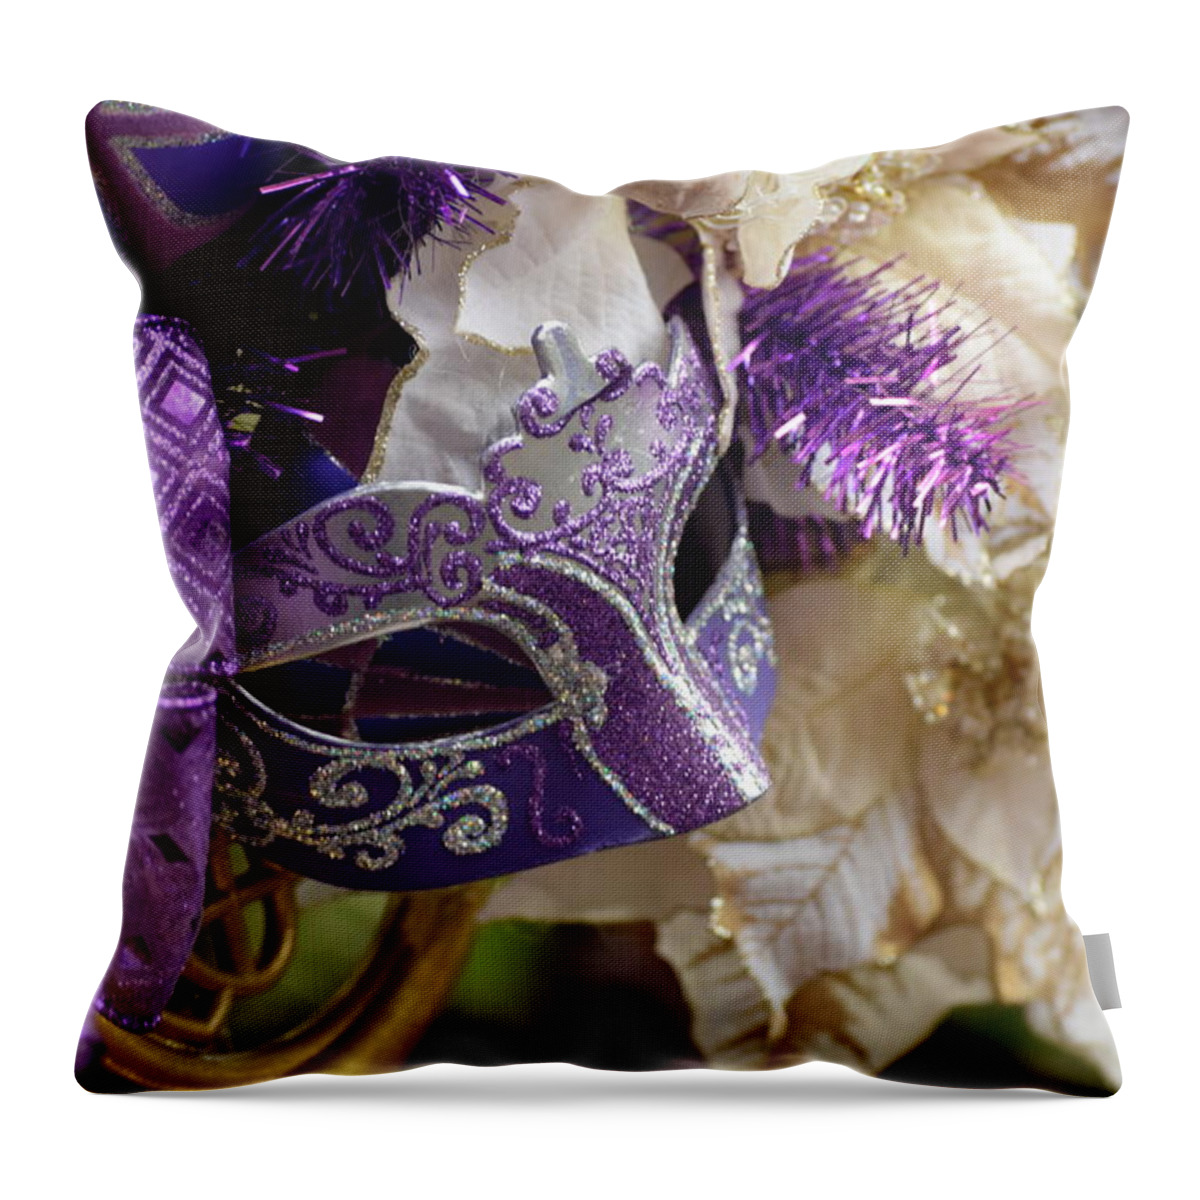 Mask Throw Pillow featuring the photograph Purple Visions by Amanda Eberly